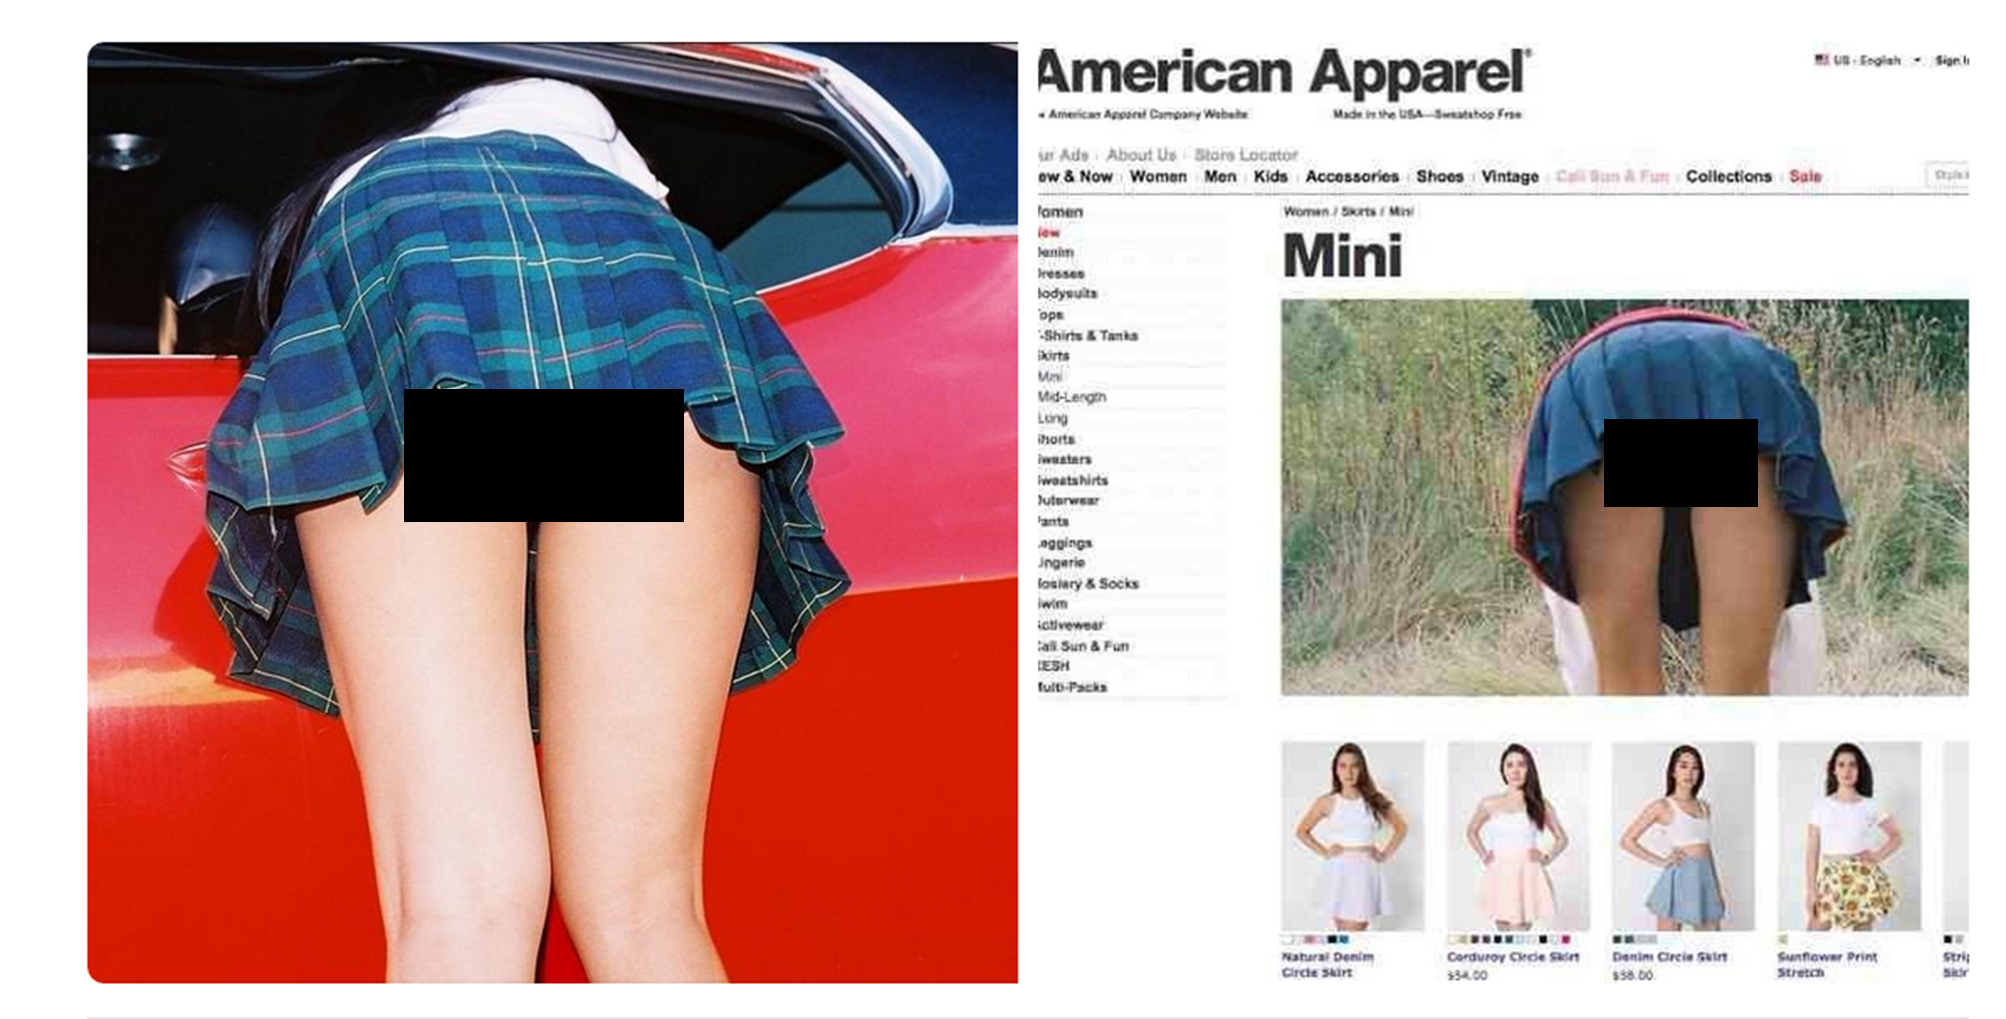 American Apparel Ad Banned in the UK for Being Too 